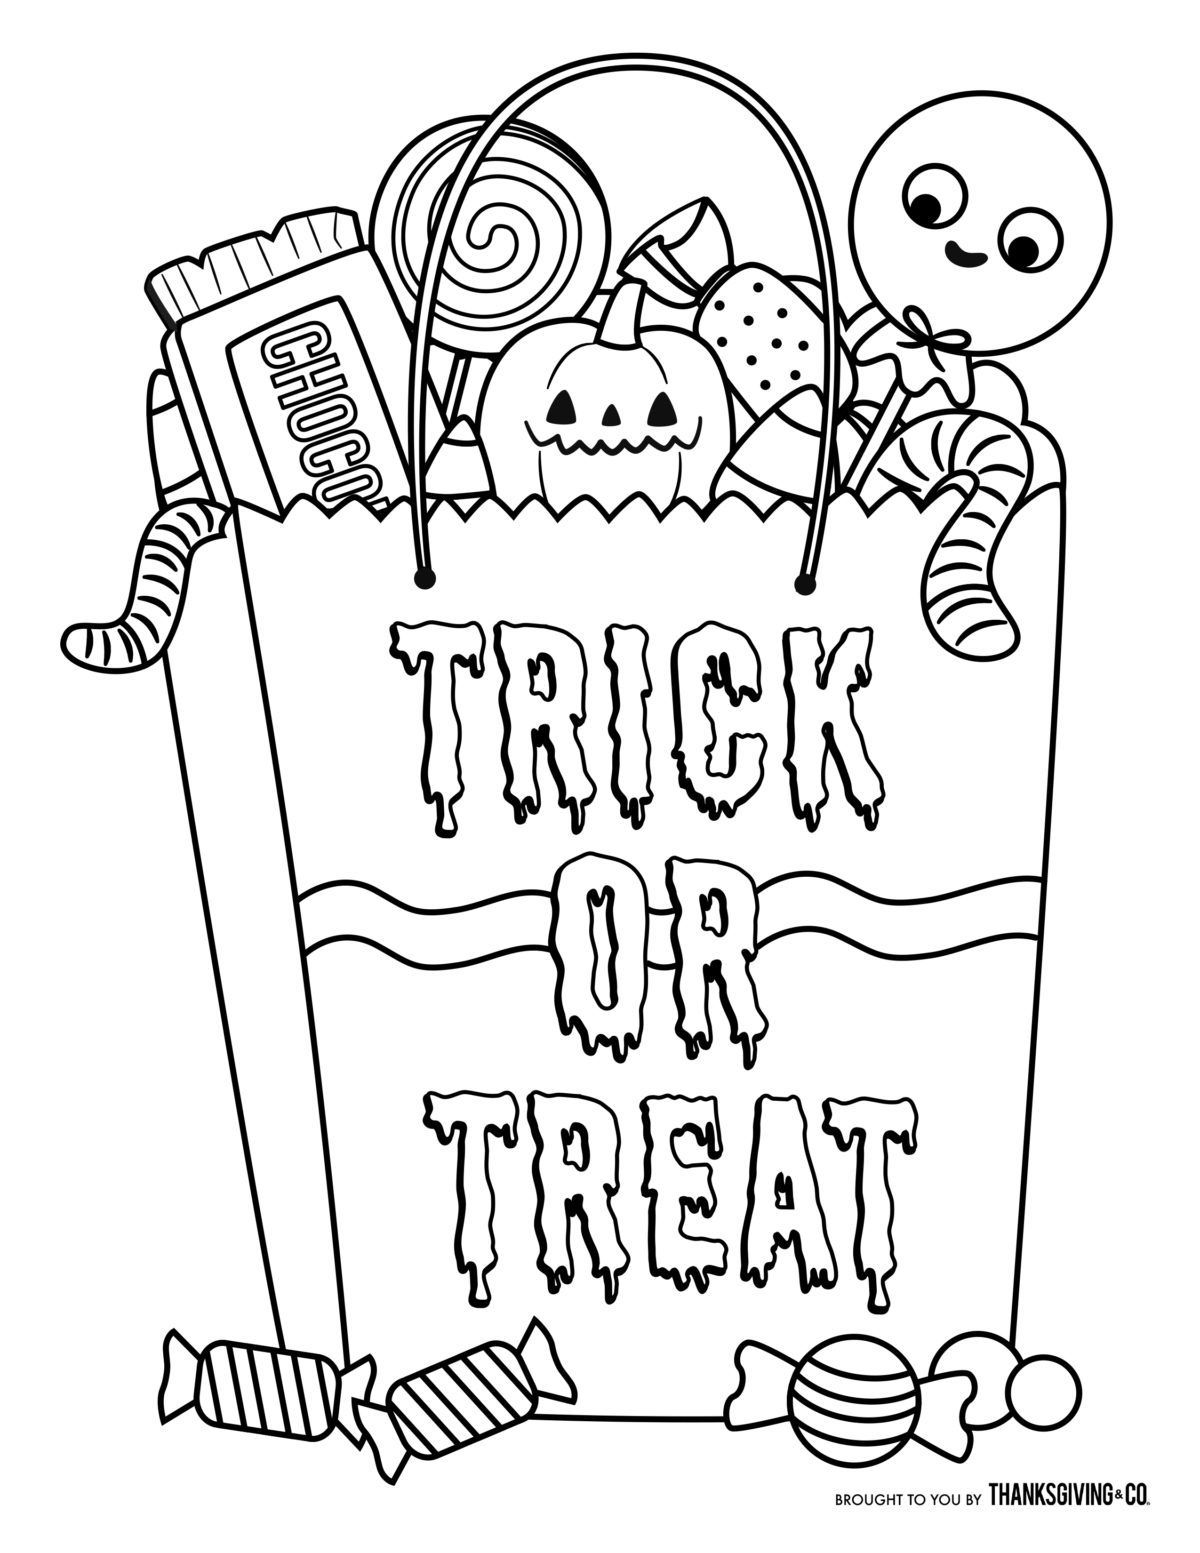 Free Halloween coloring pages for kids (or for the kid in you) -   16 holiday Images coloring pages ideas